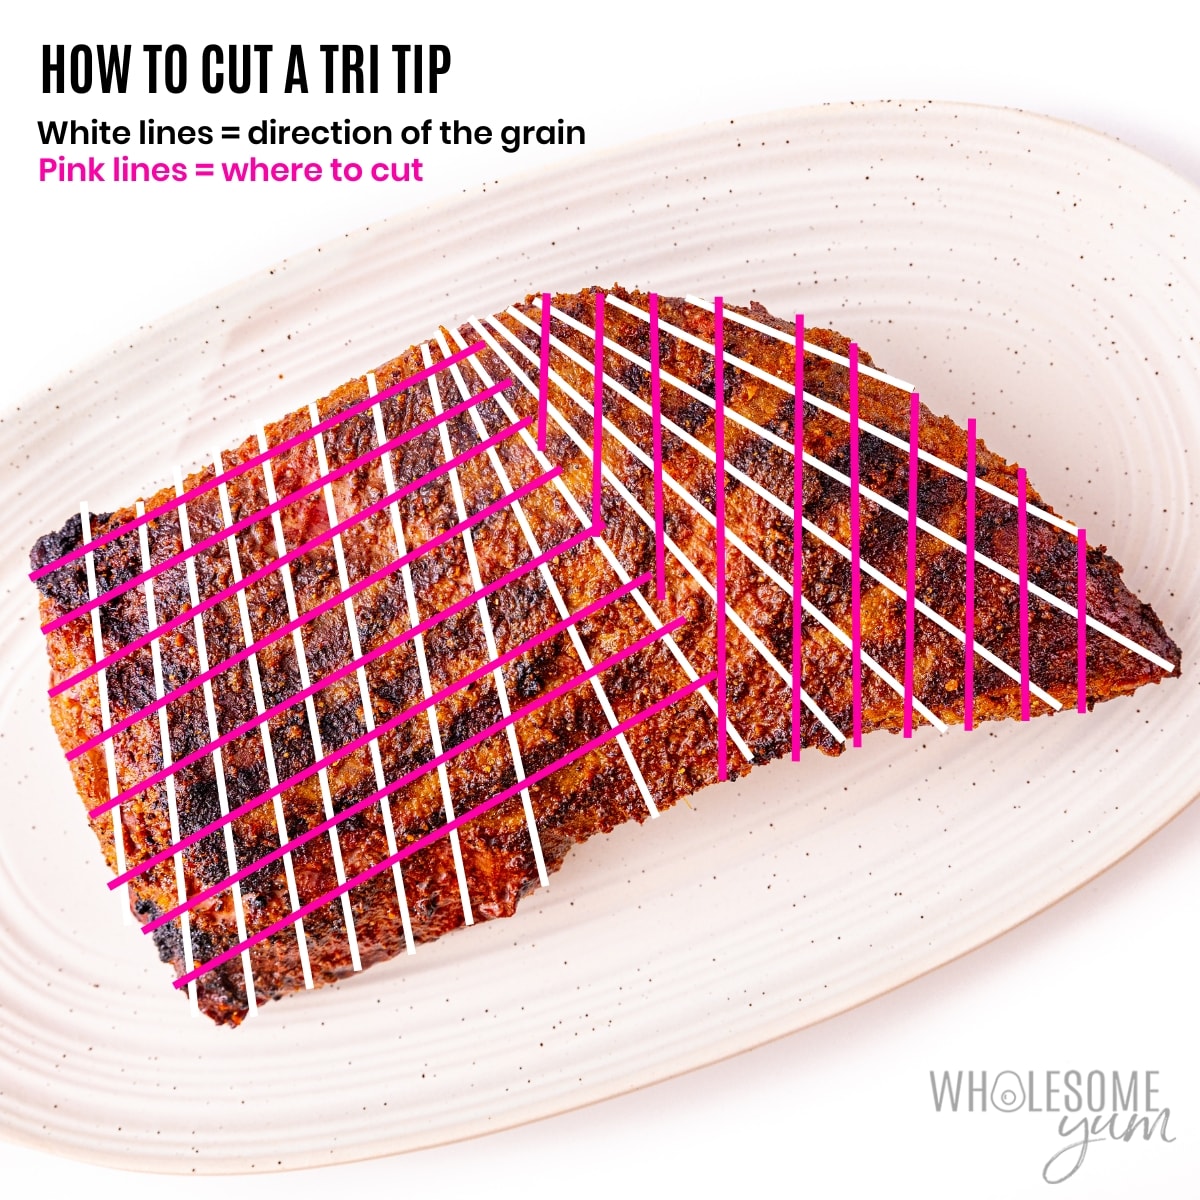 How to cut a tri-tip - showing grain direction.